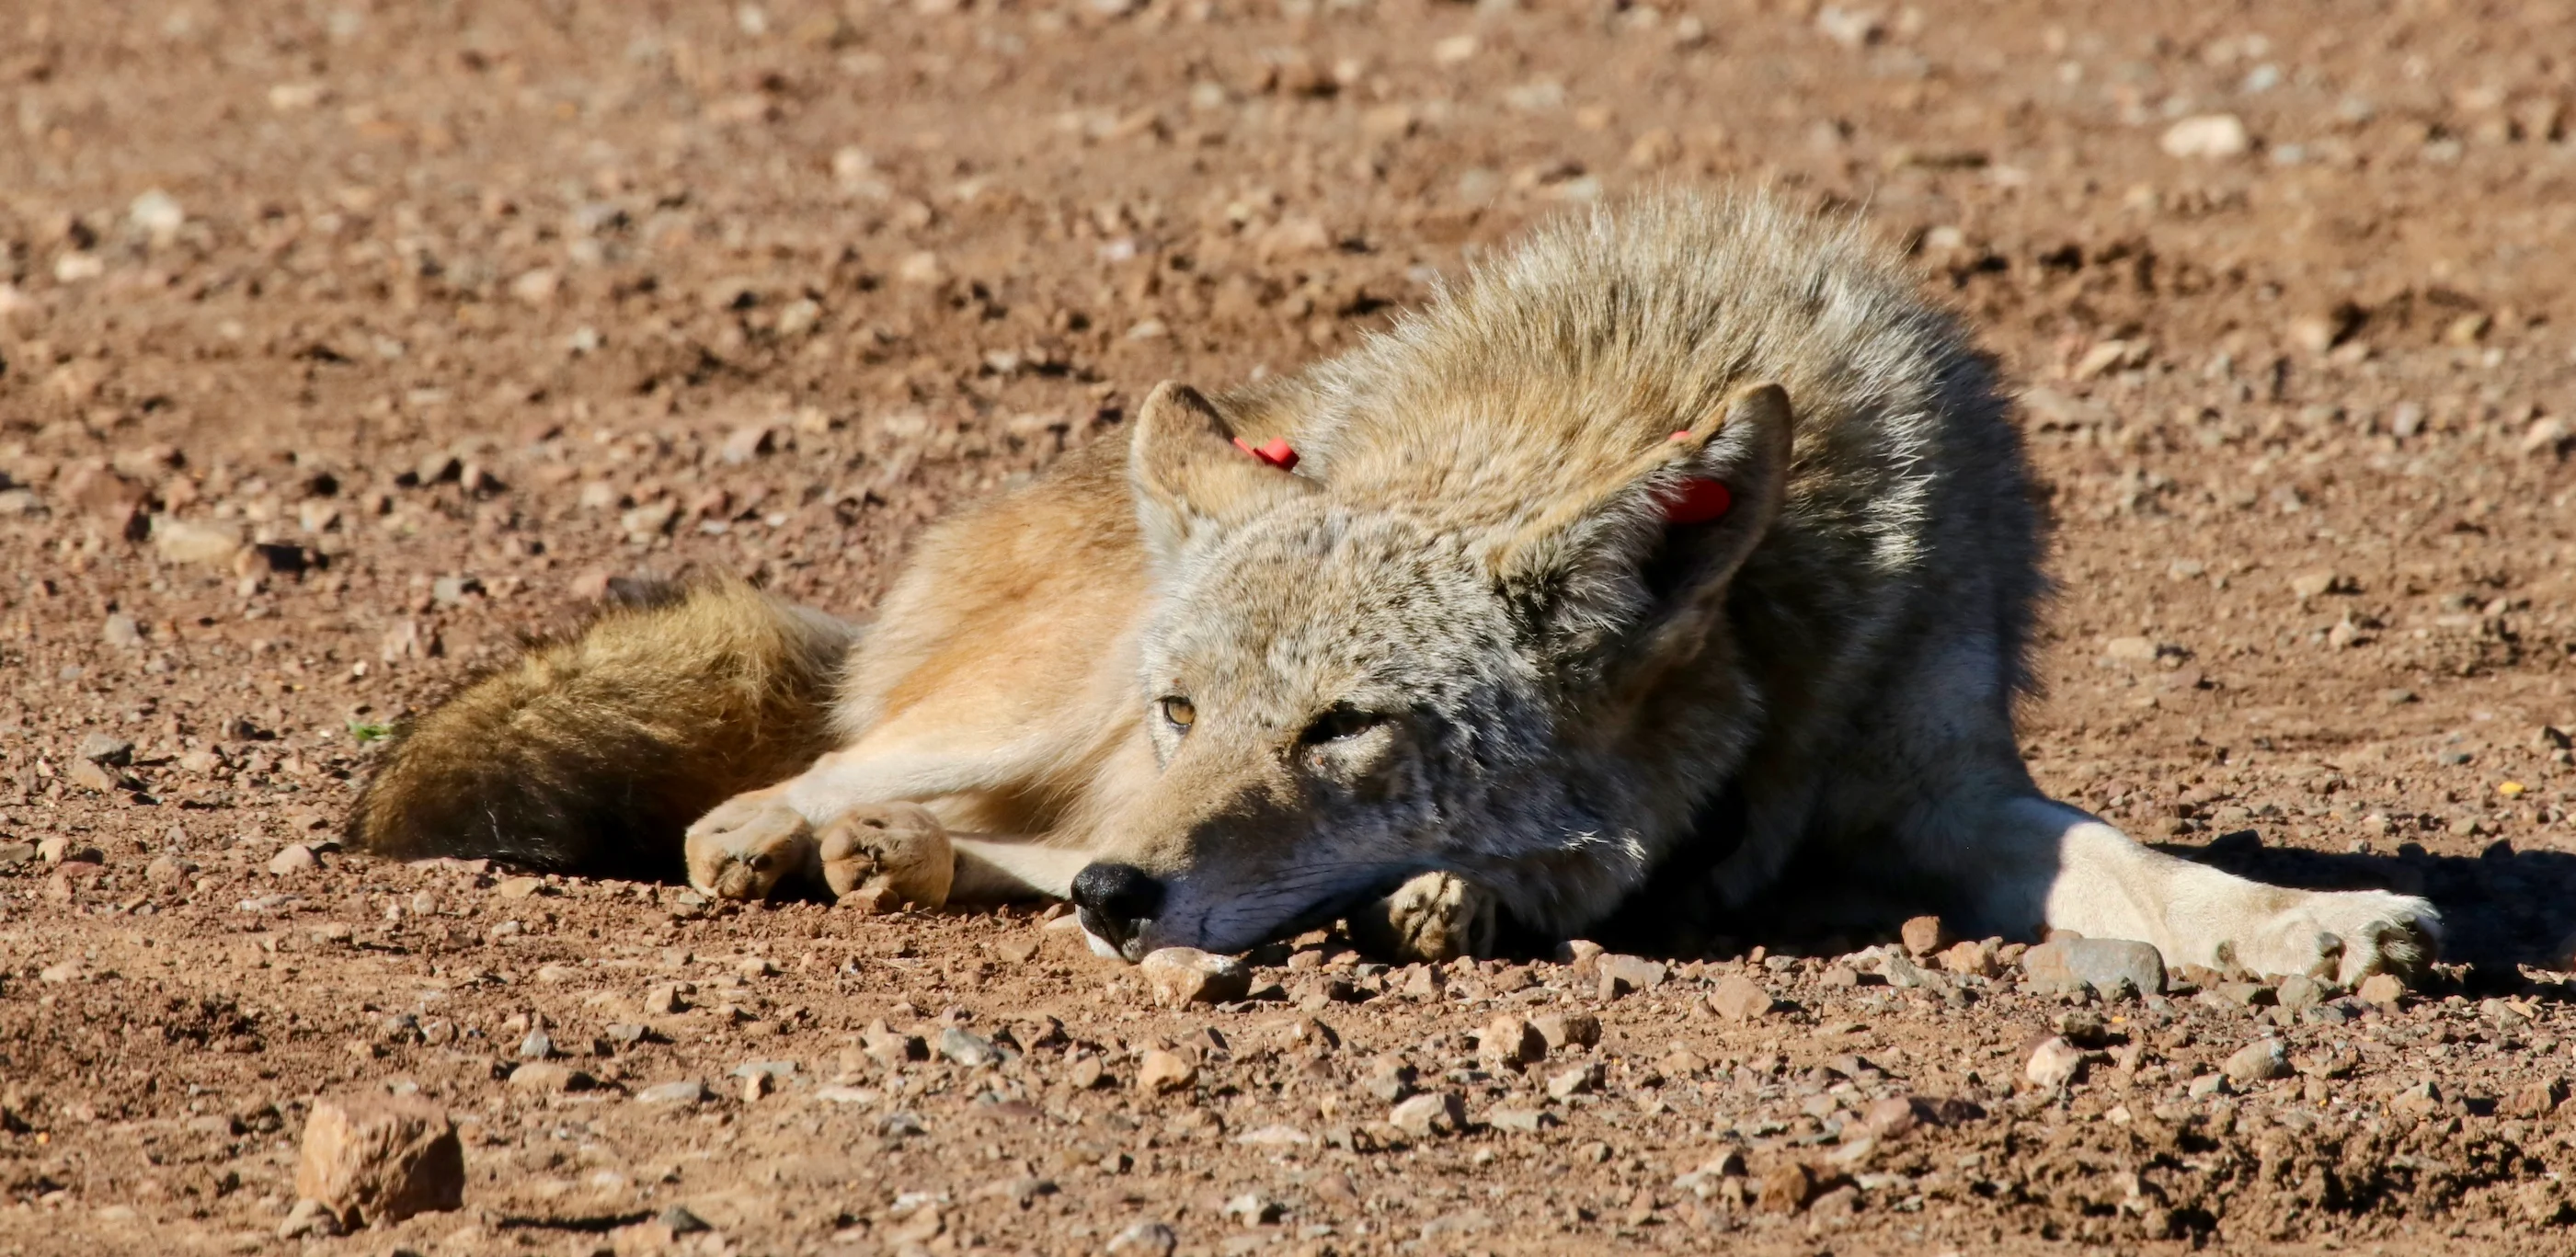 A coyote rests on the ground in California’s Golden Gate National Recreation Area. (Daniel Karp/UC Davis)